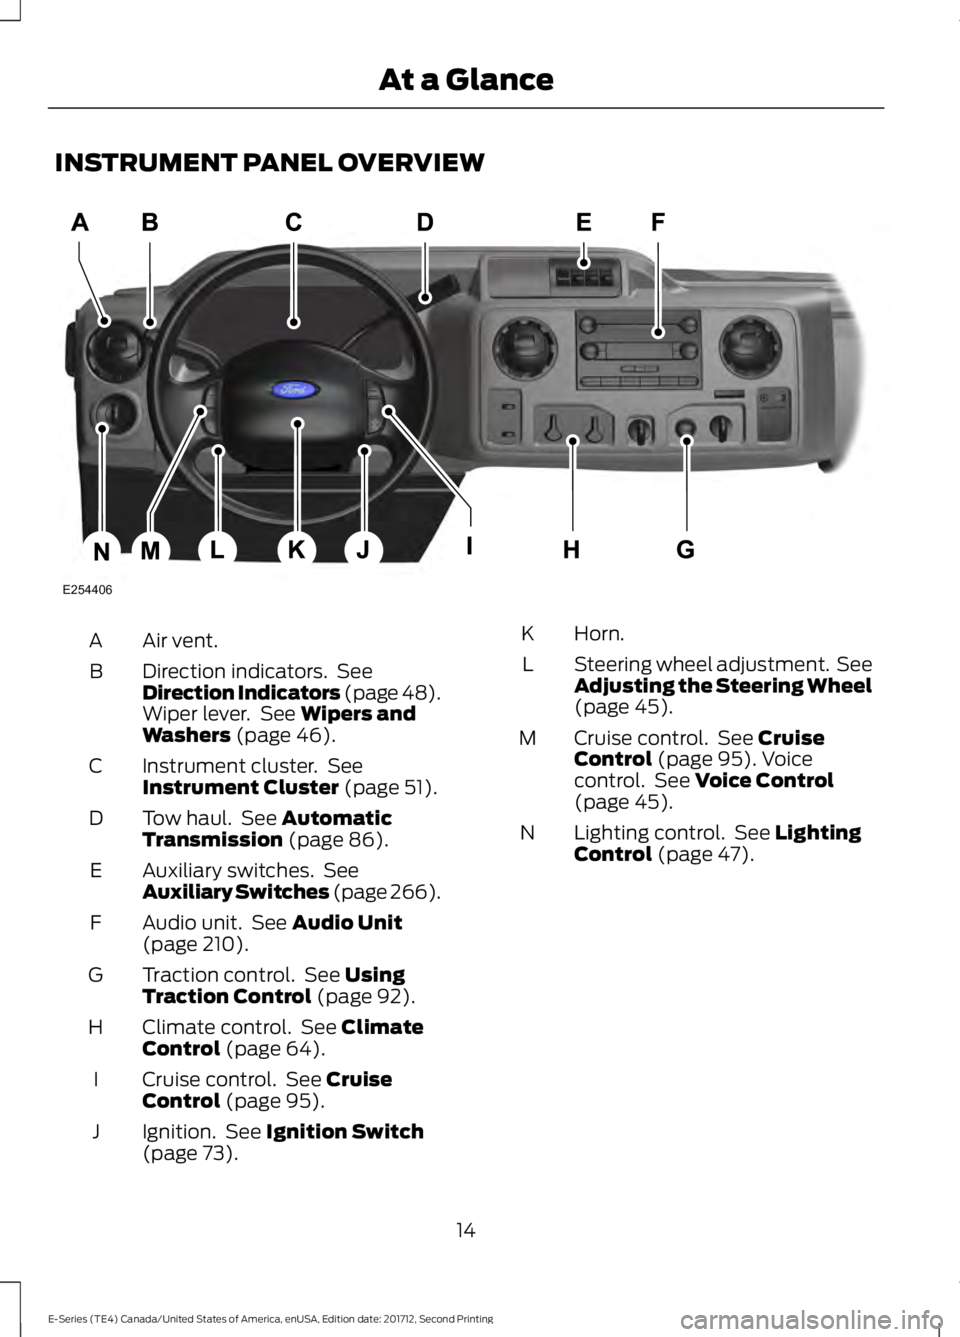 FORD E-450 2018  Owners Manual INSTRUMENT PANEL OVERVIEW
Air vent.
A
Direction indicators.  See
Direction Indicators (page 48).
Wiper lever.  See Wipers and
Washers (page 46).
B
Instrument cluster.  See
Instrument Cluster
 (page 51